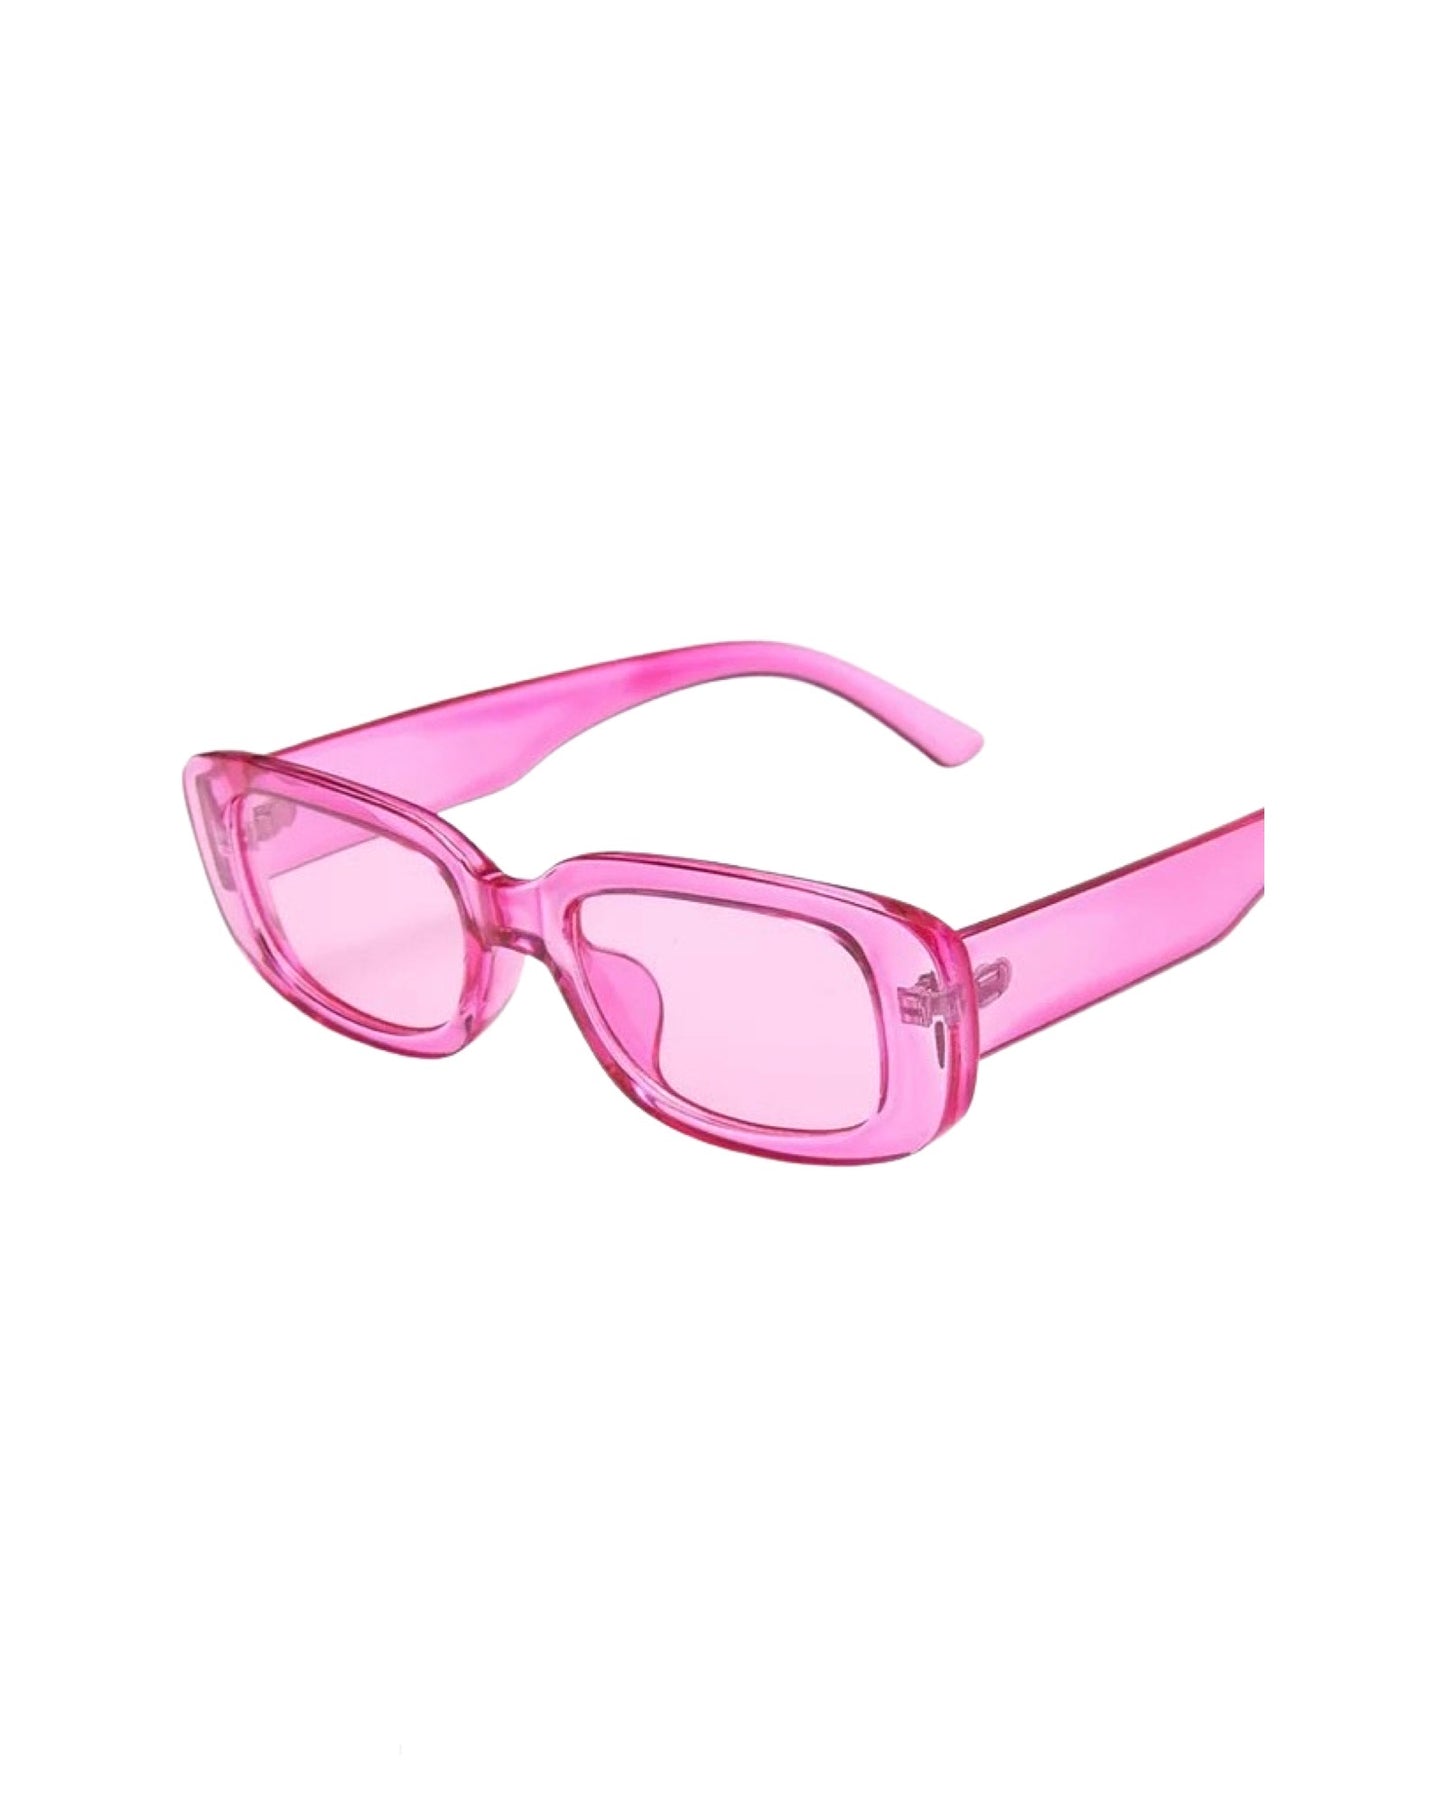 CANDY PINK 70S RETRO SHADES